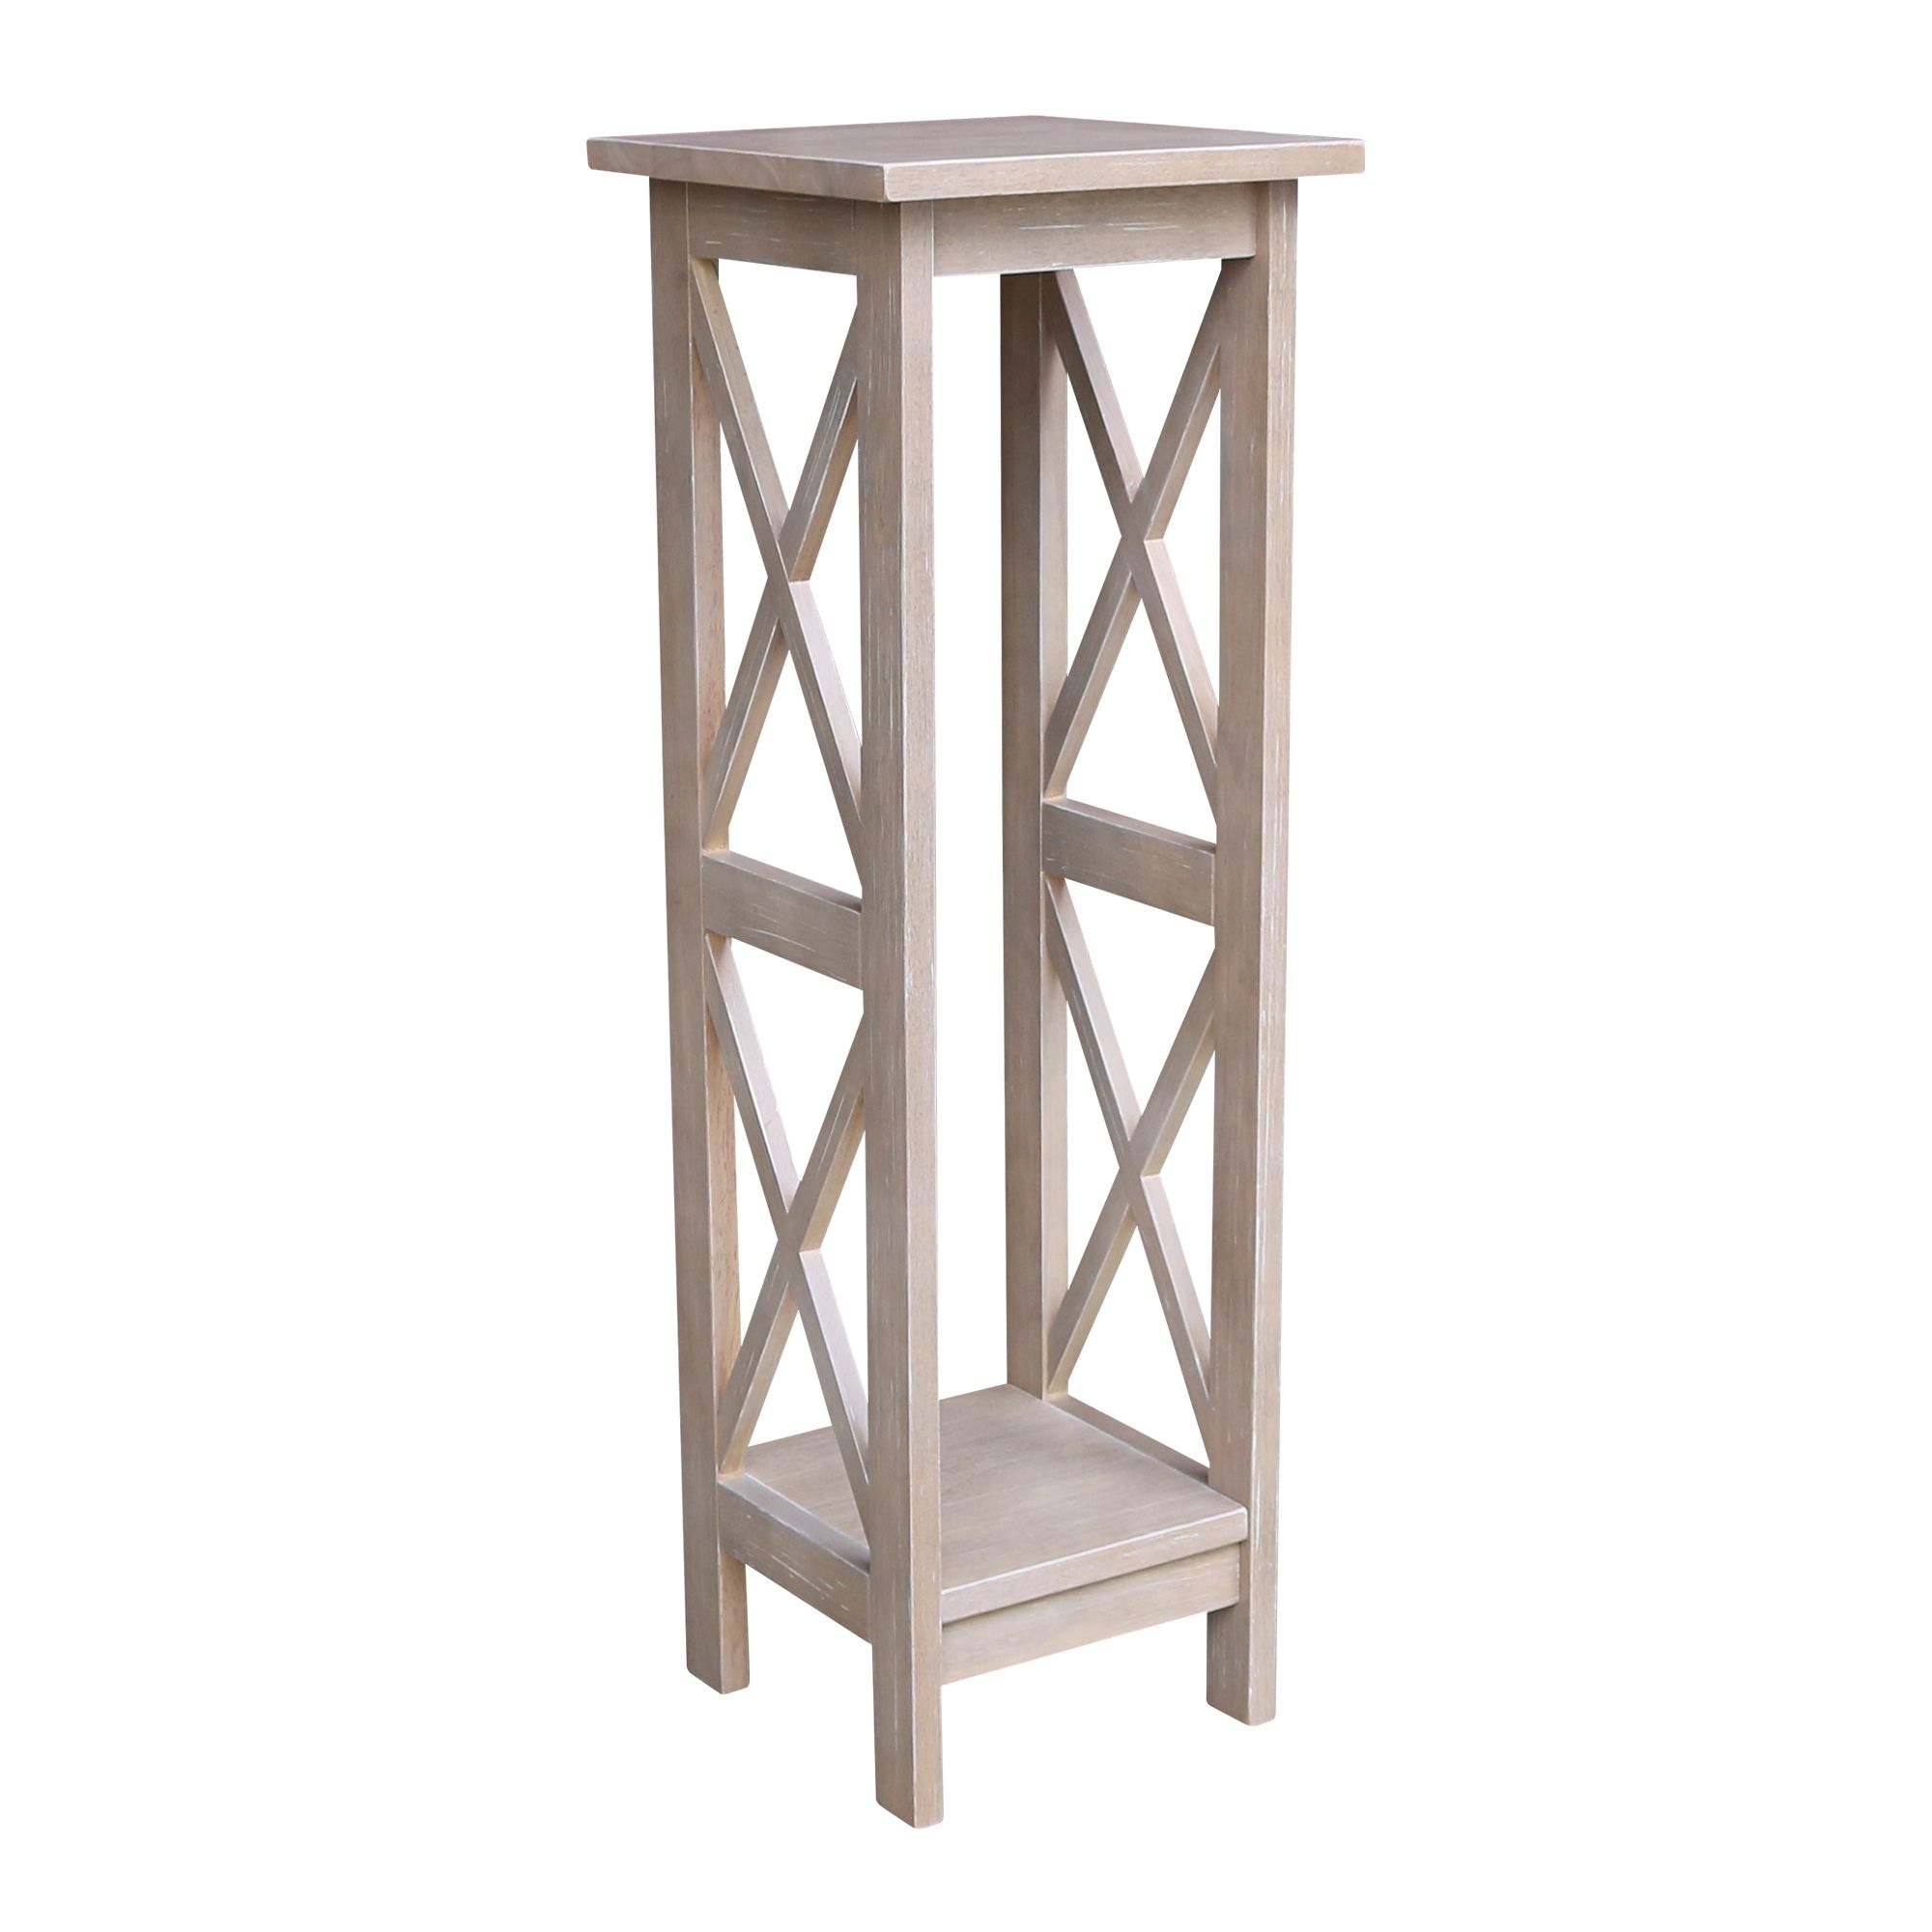 Weathered Gray Plant Stands Intended For Recent Solid Wood X Sided Plant Stand In Washed Gray Taupe – Walmart (View 10 of 15)